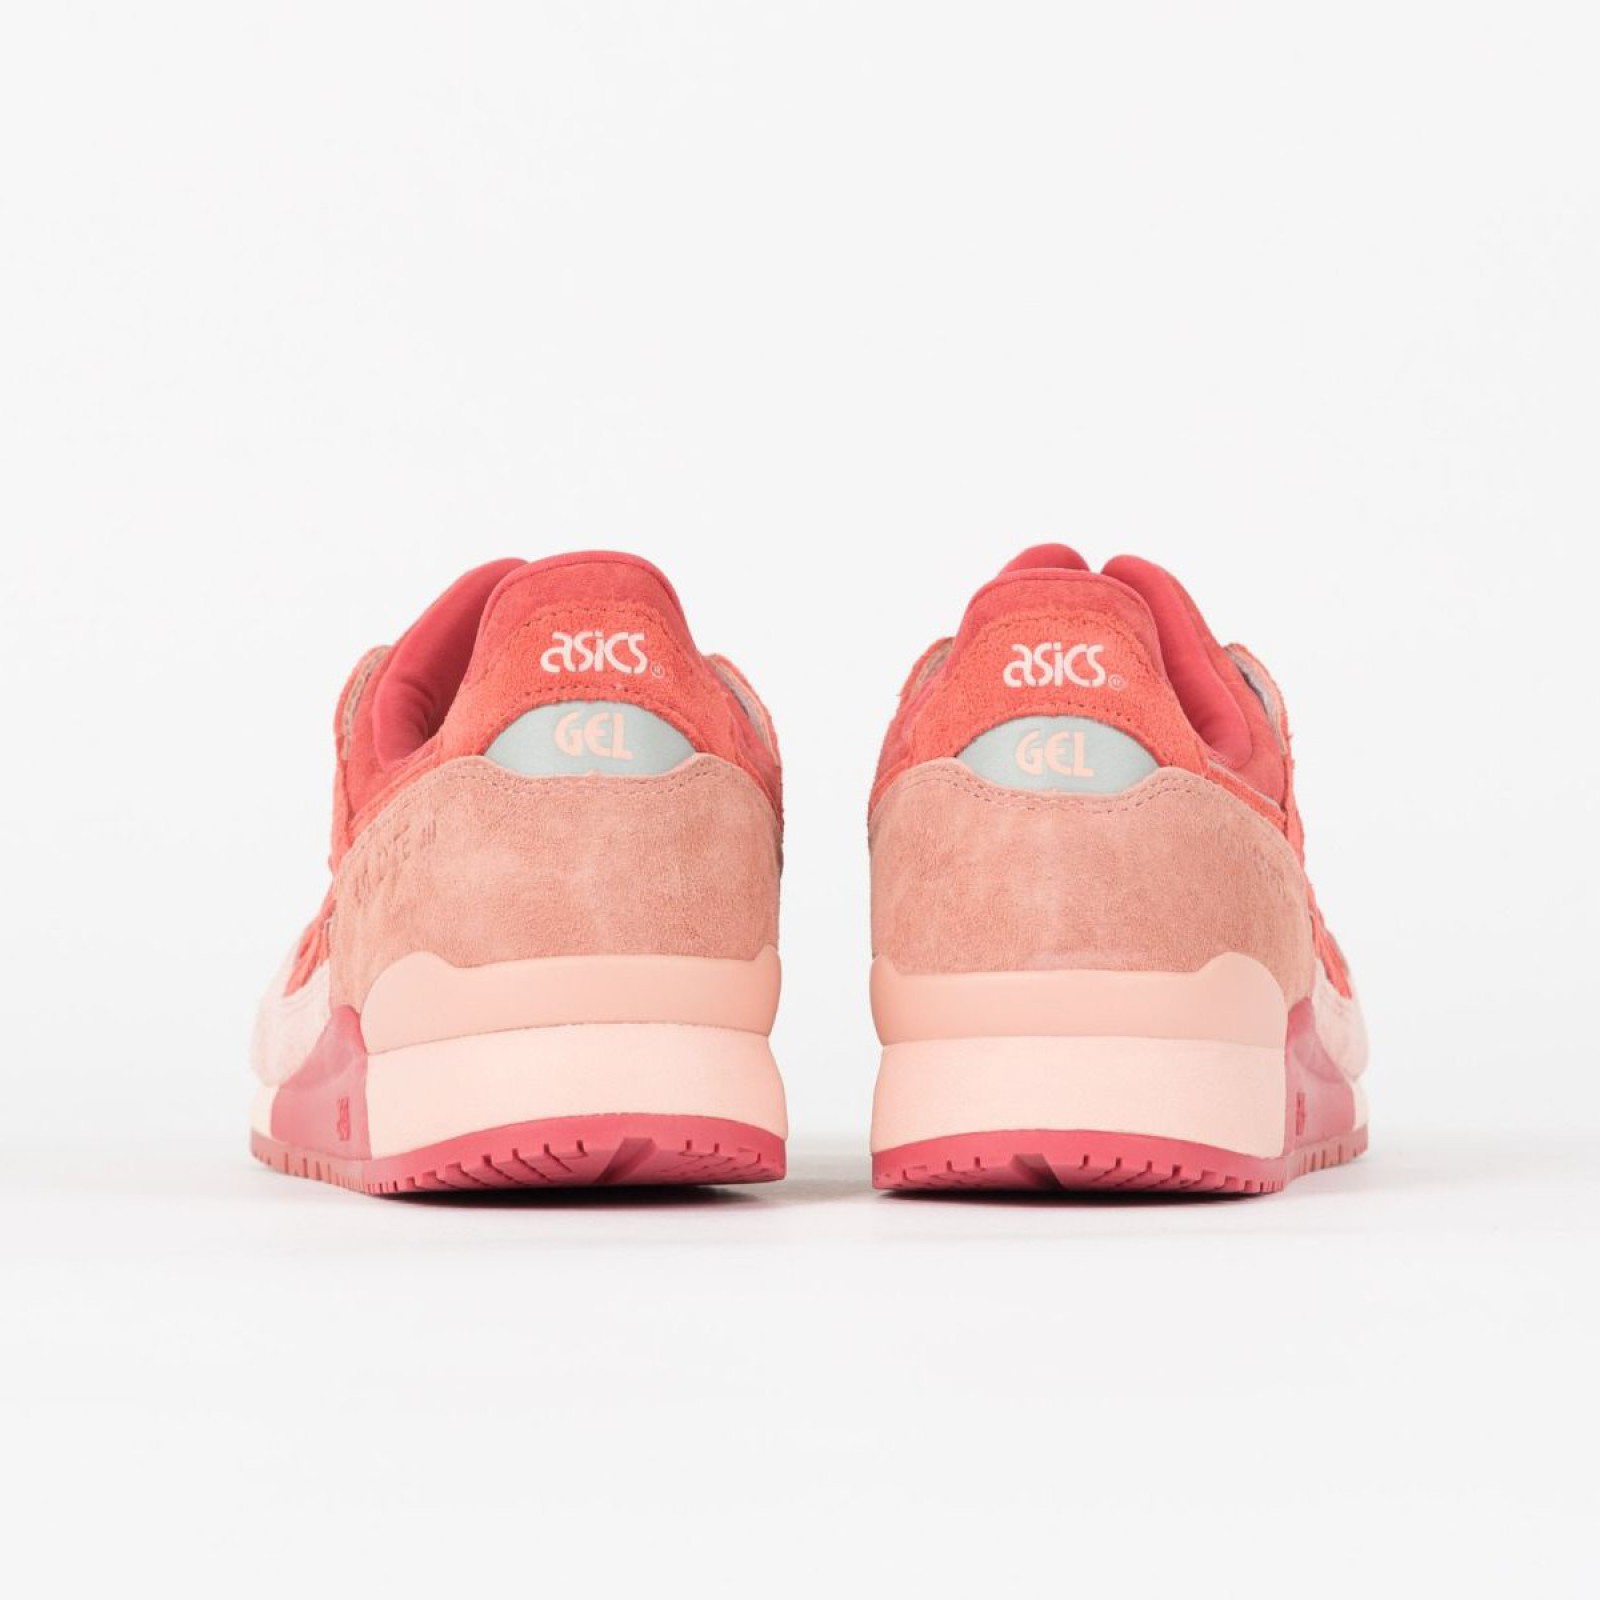 Concepts x Asics
Gel Lyte III
Coral / Silver